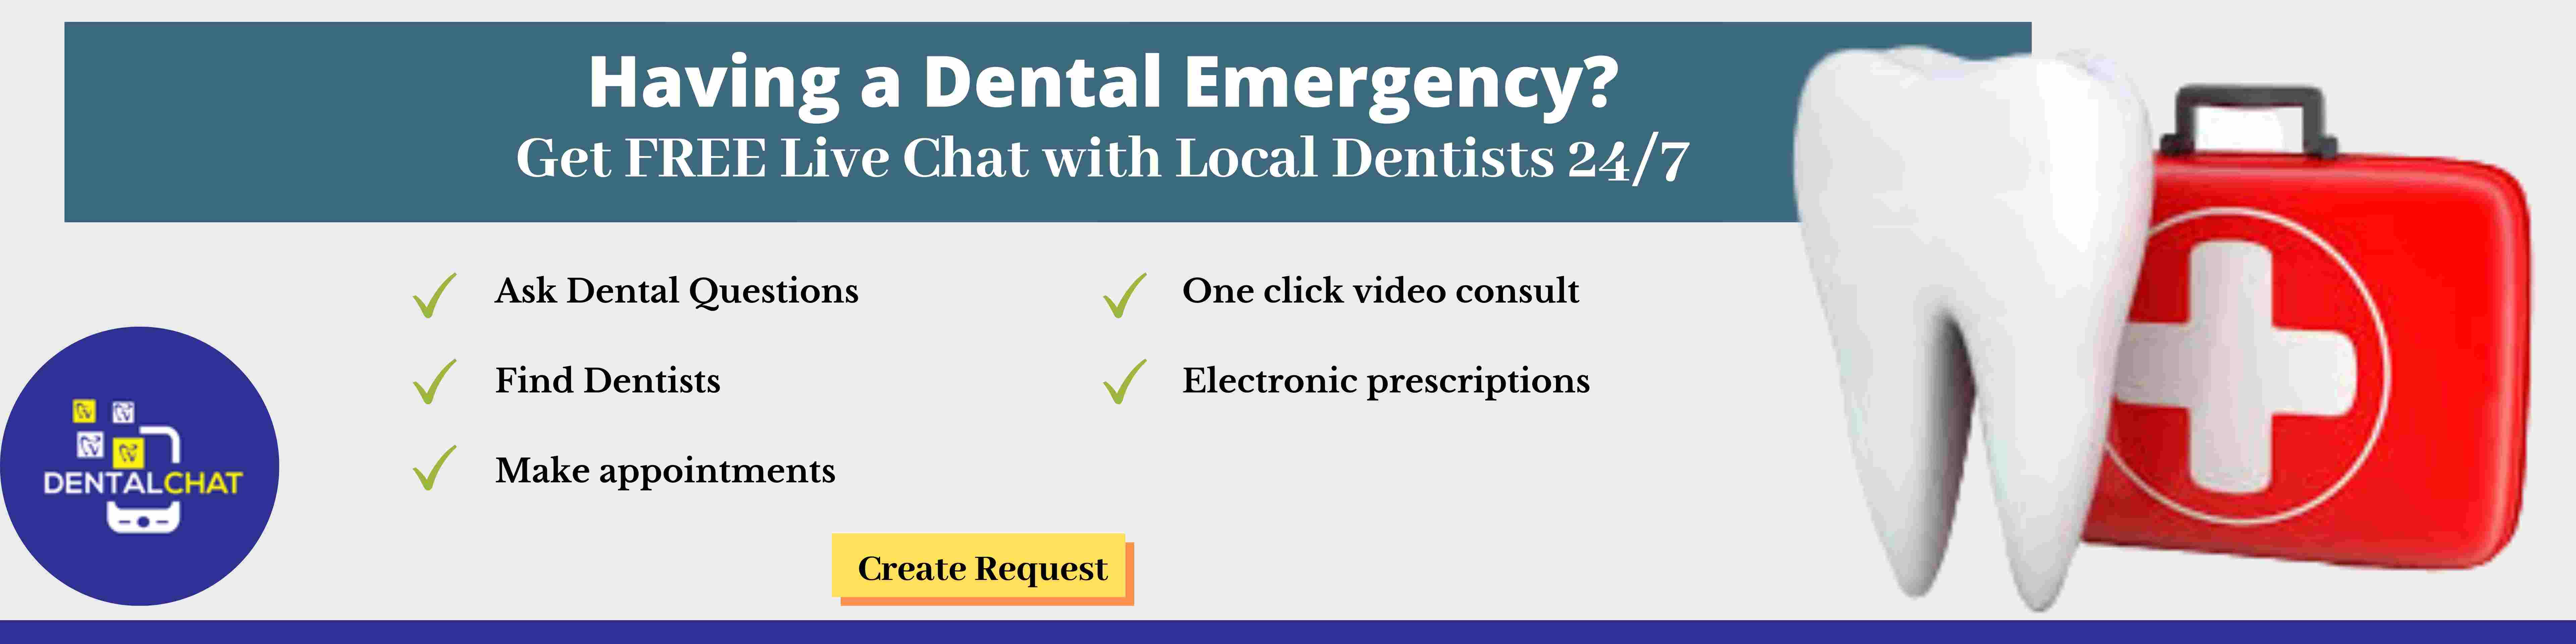 Local Dental Question Blogging, Local Emergency Dentist Questions Online about tooth pain